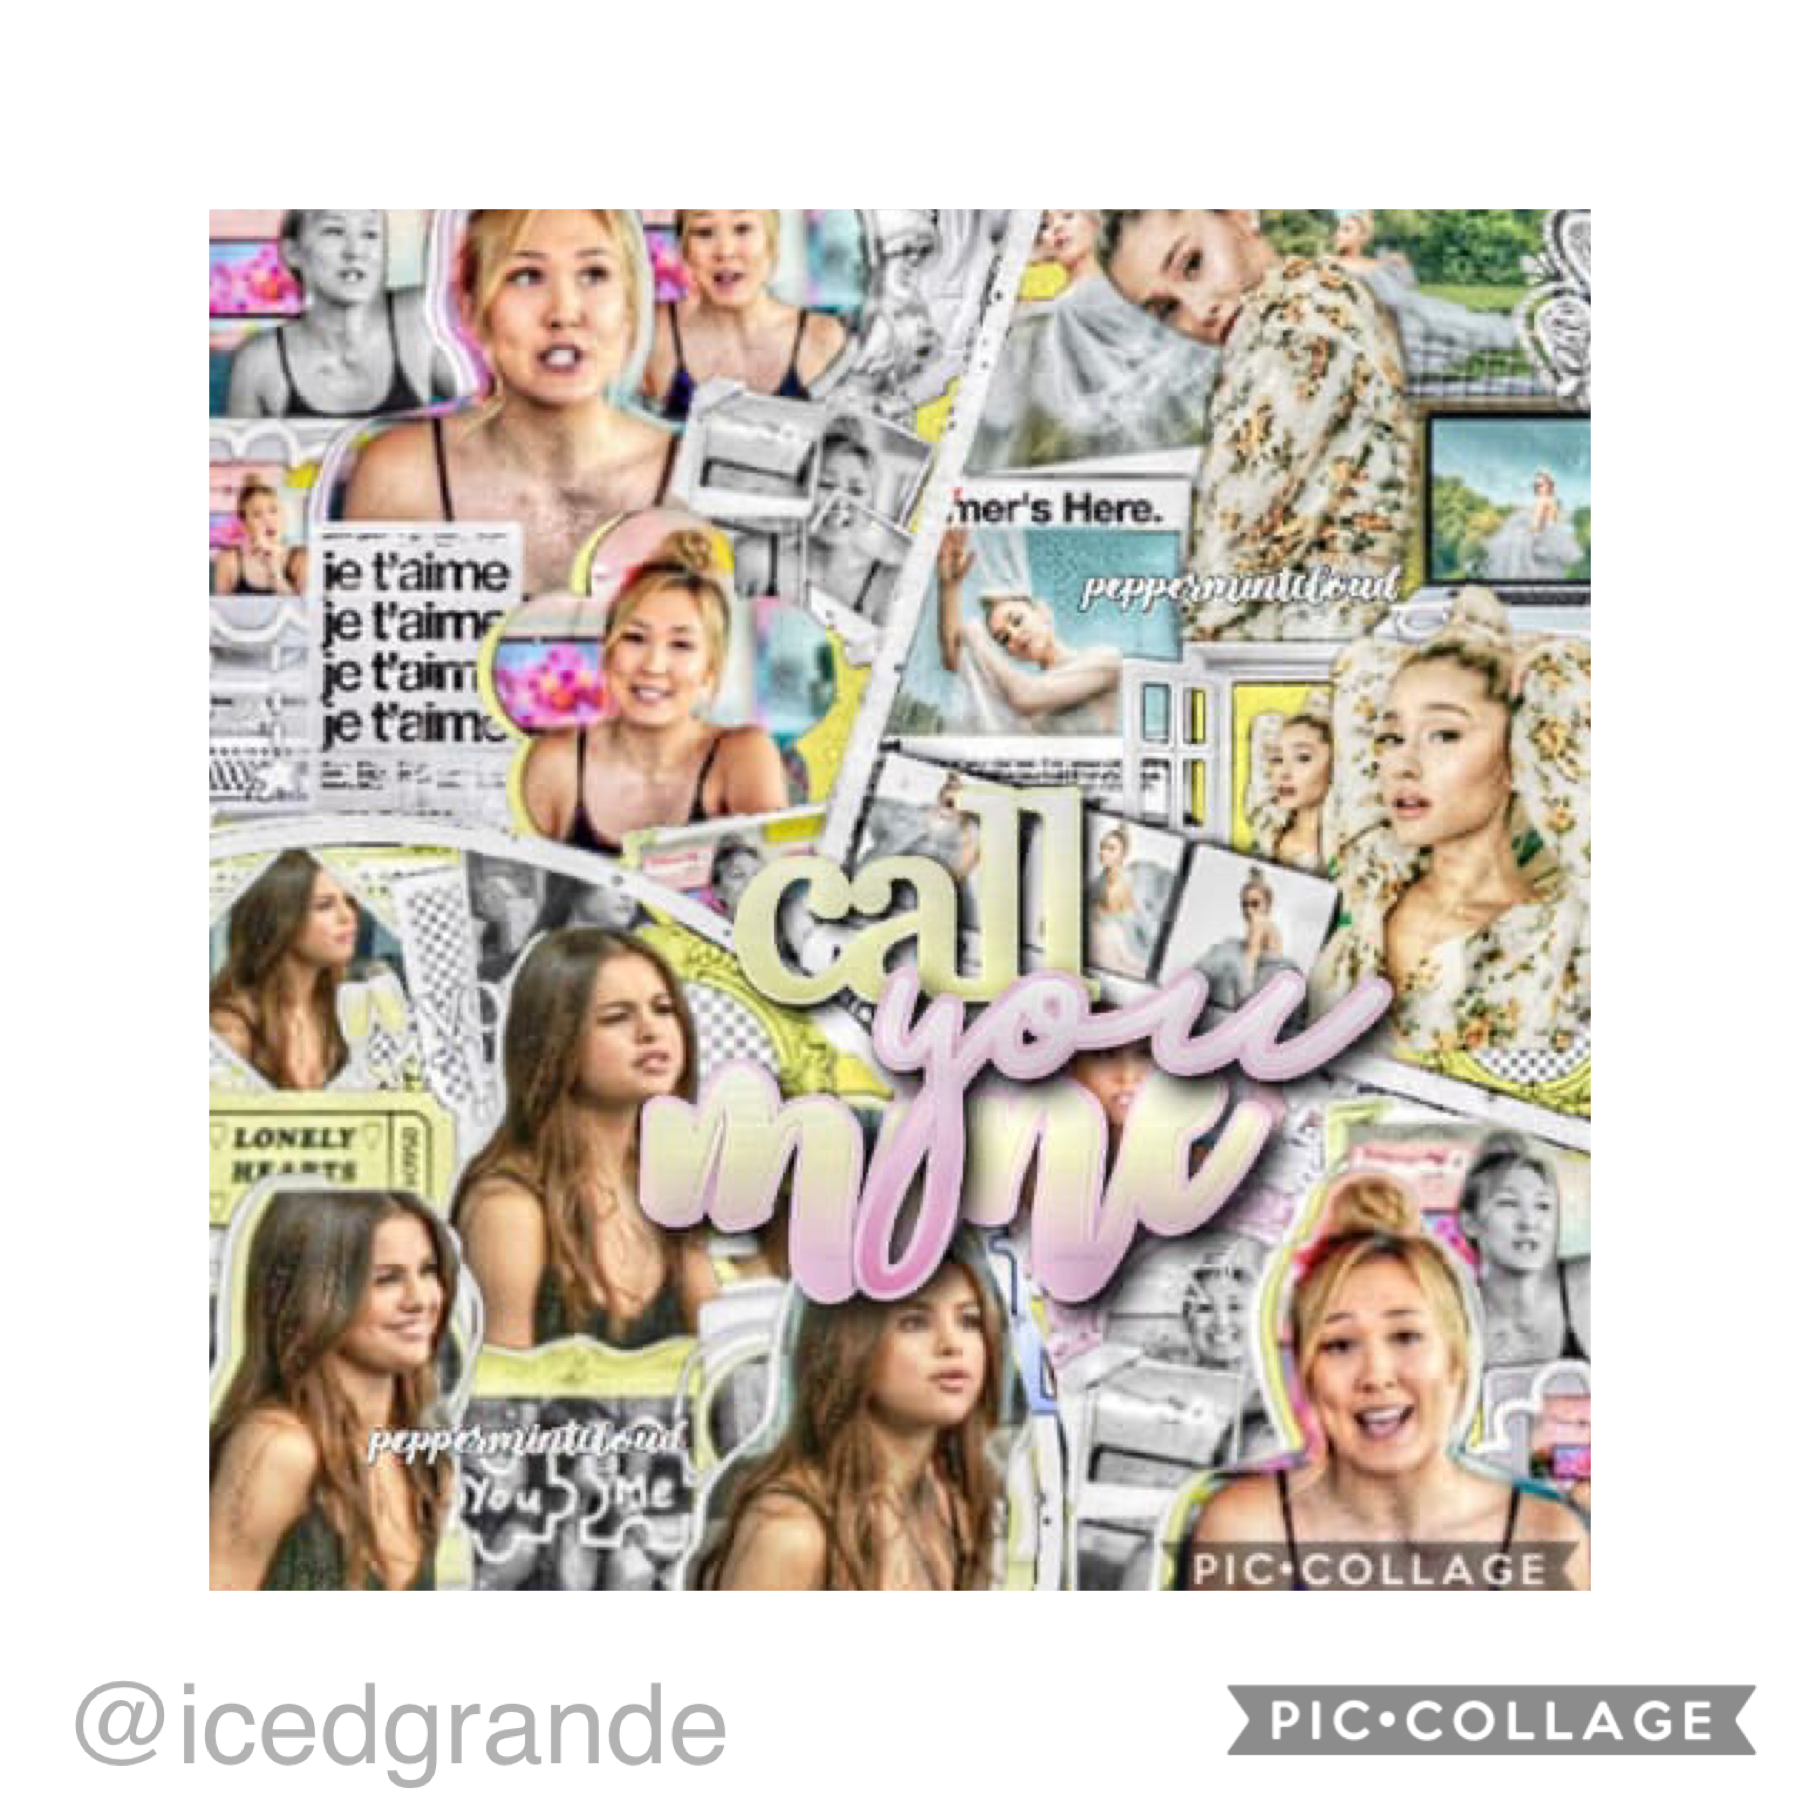 featuring...
icedgrande!
i wouldn’t say this collager is underrated 
she has many followers and gets tons of deserved likes 
on her amazing collages!
✨go follow them✨